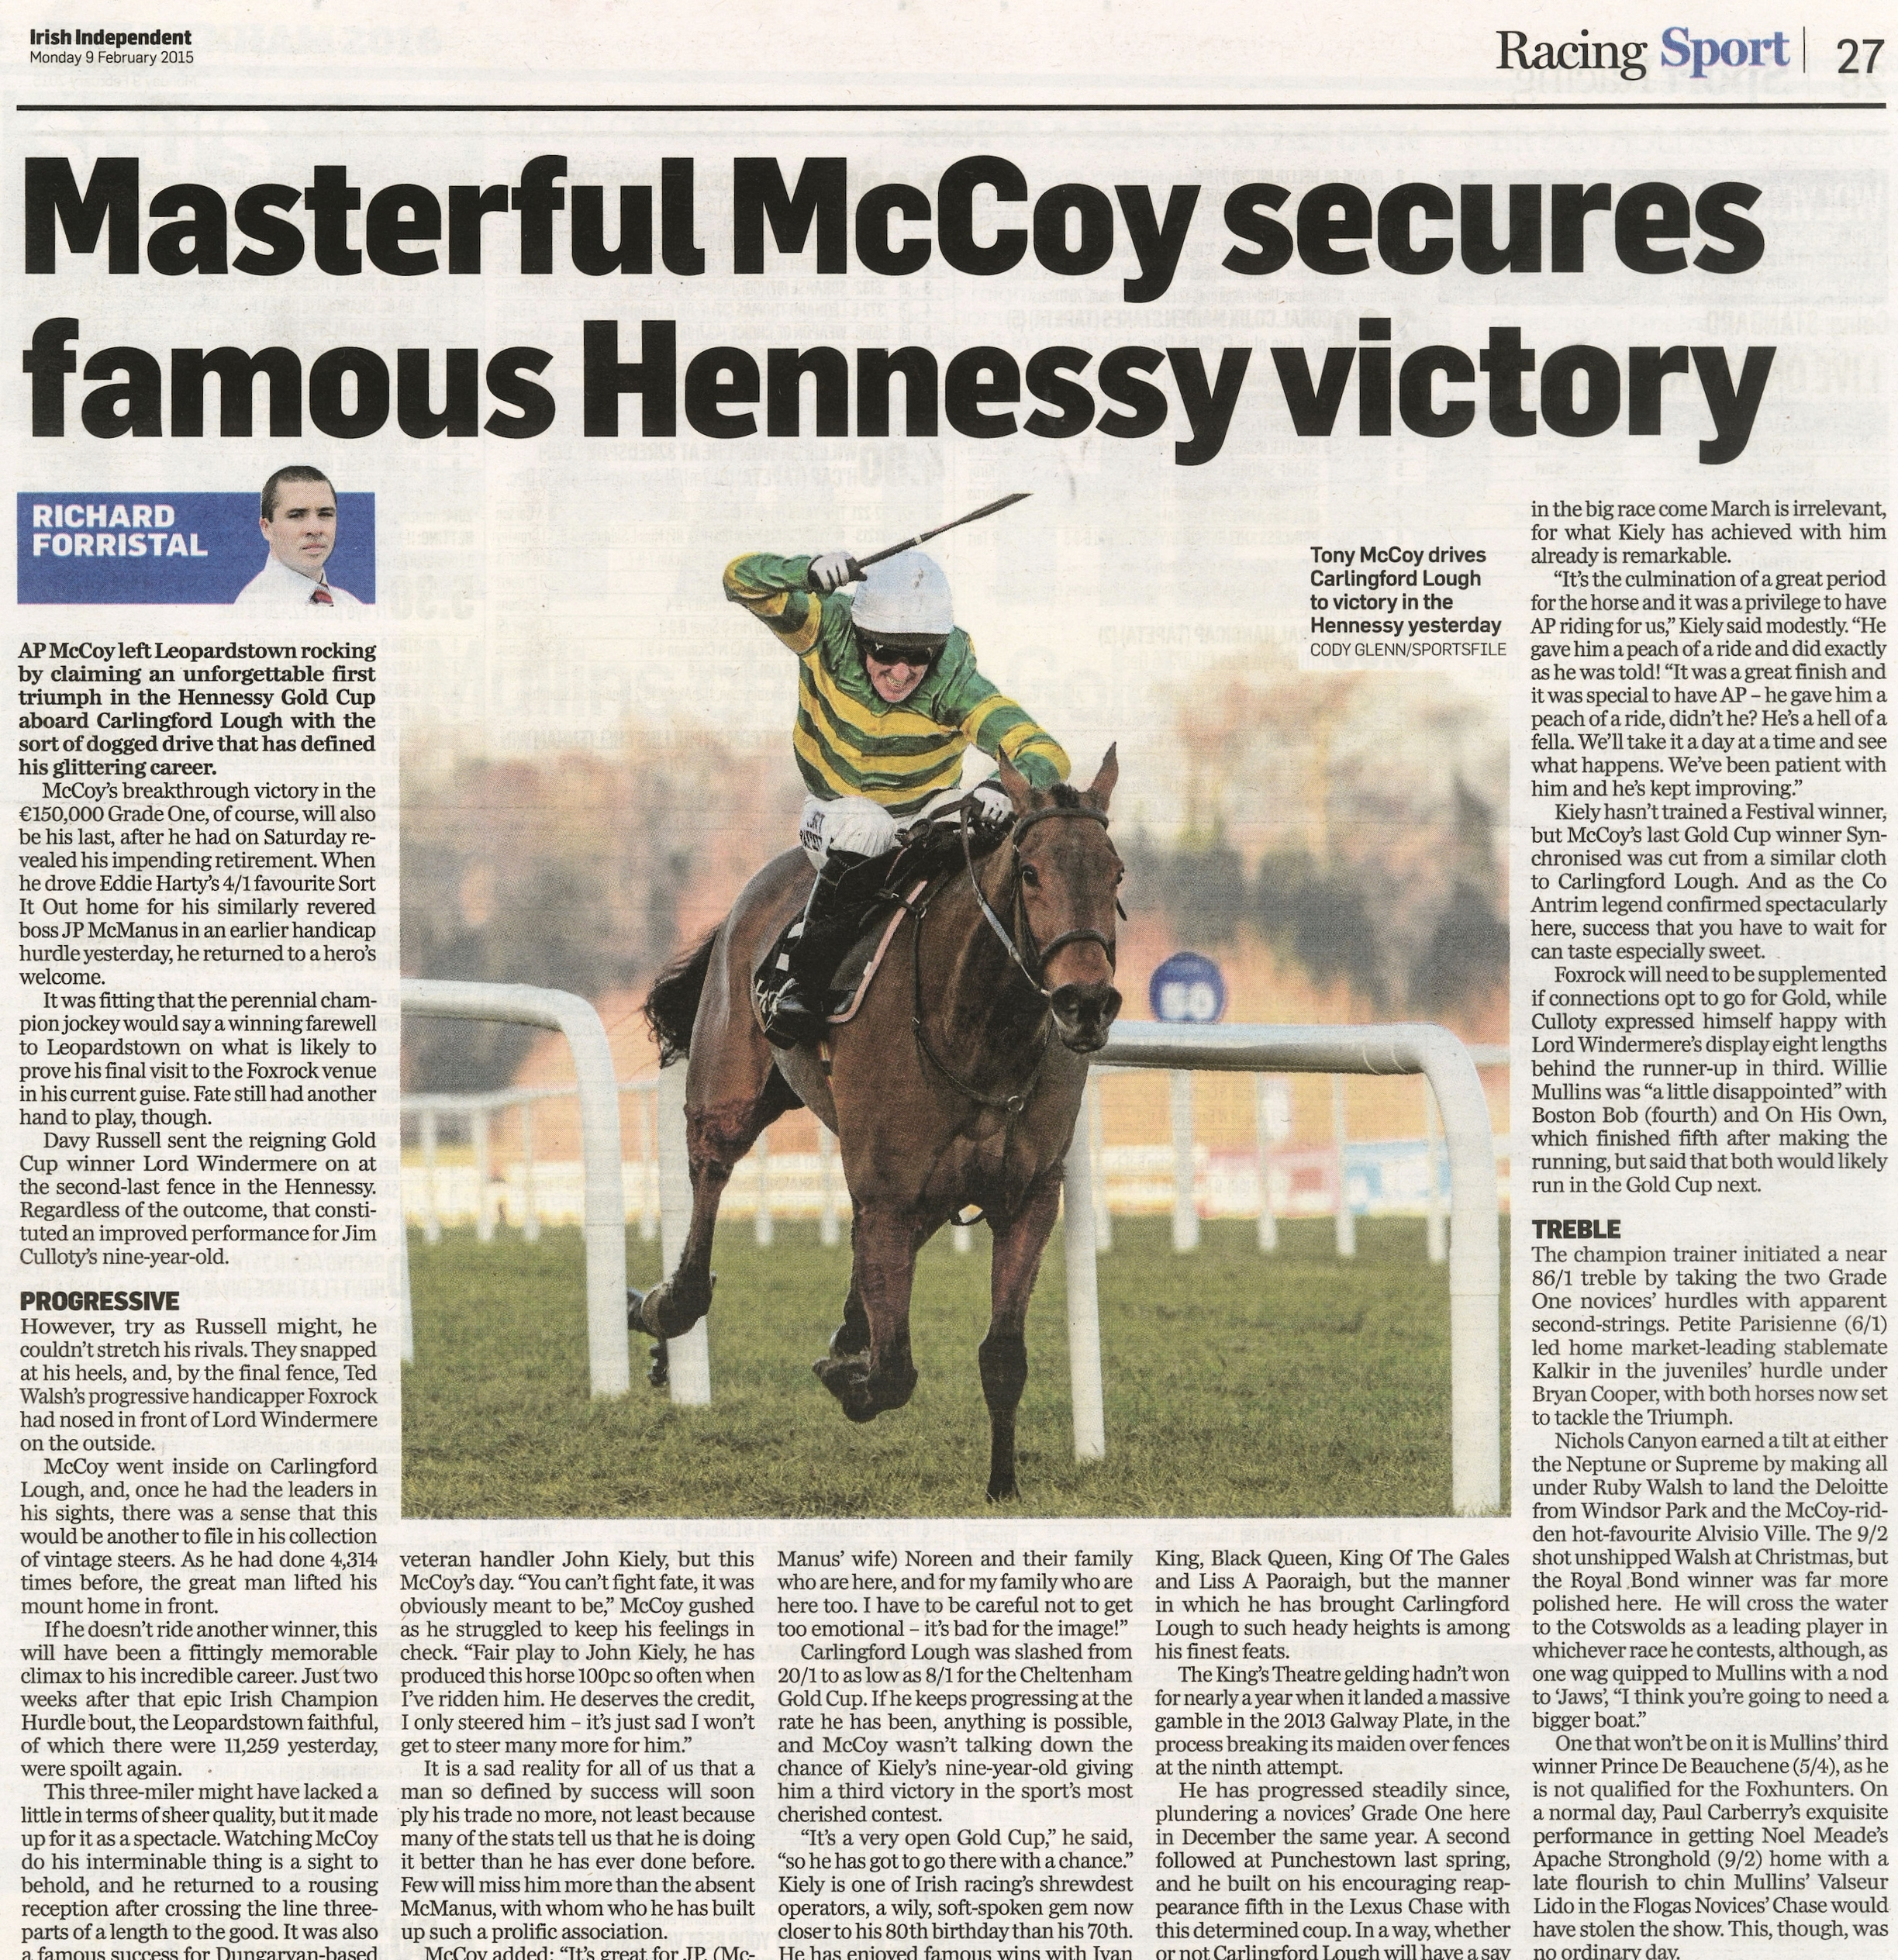  A.P. McCoy celebrates winning the Irish Gold Cup on Carlingford Lough at Leopardstown February 8 2015  Irish Independent  